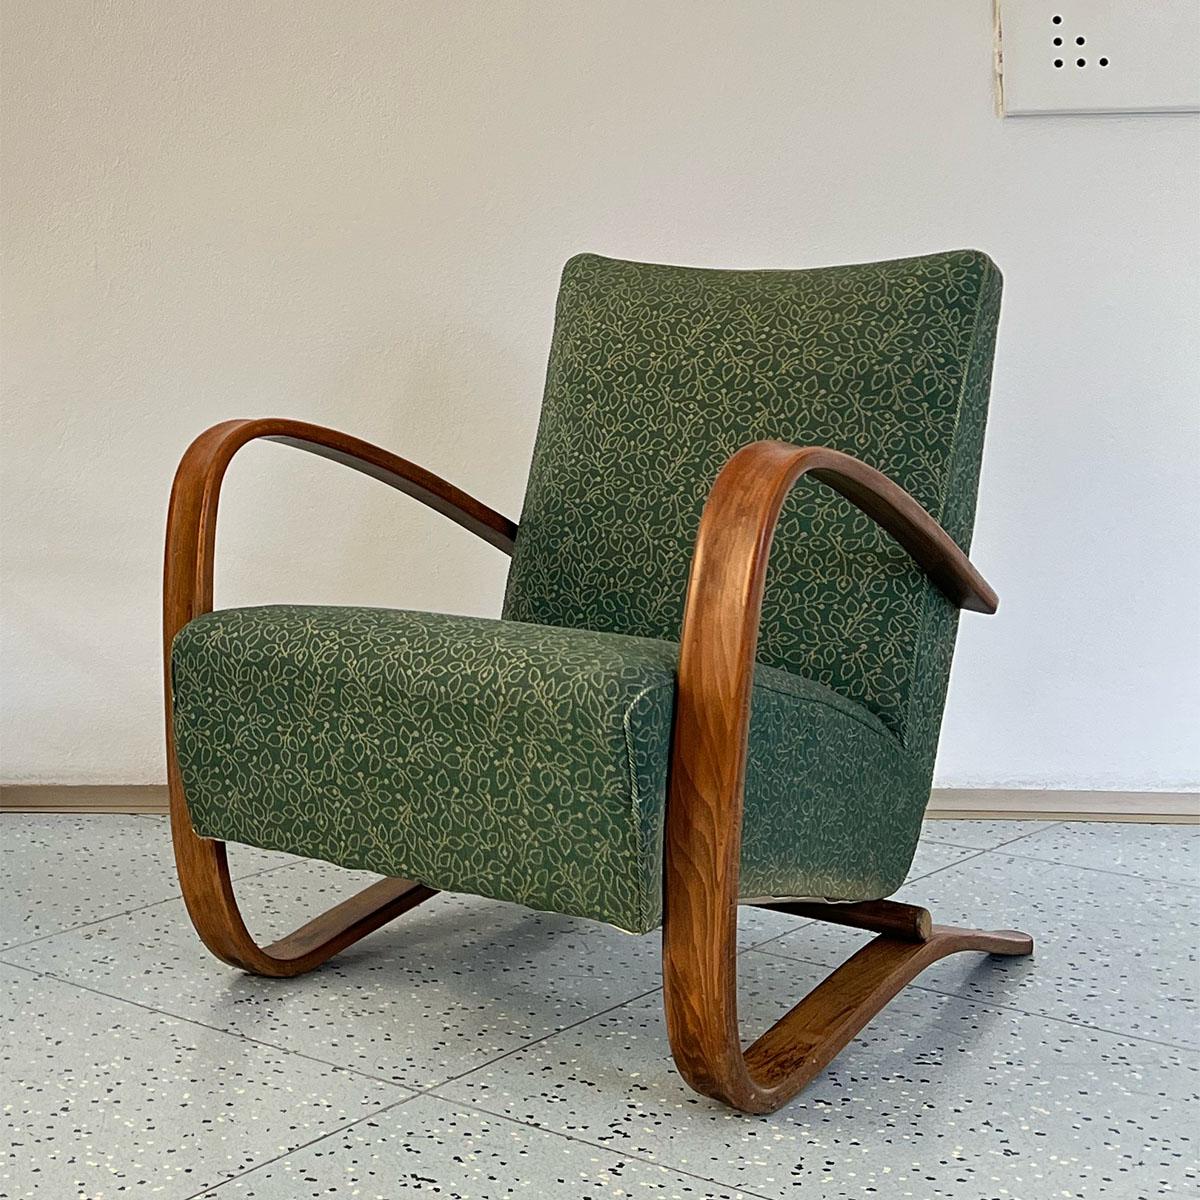 Elegant lounge chair in wood and fabric, model H-269, designed by Jindrich Halabala and manufactured by UP Závody in former Czechoslovakia, 1930s.

Perhaps one of the most well-known lounge chair models by the renowned Czech designer, the H-269